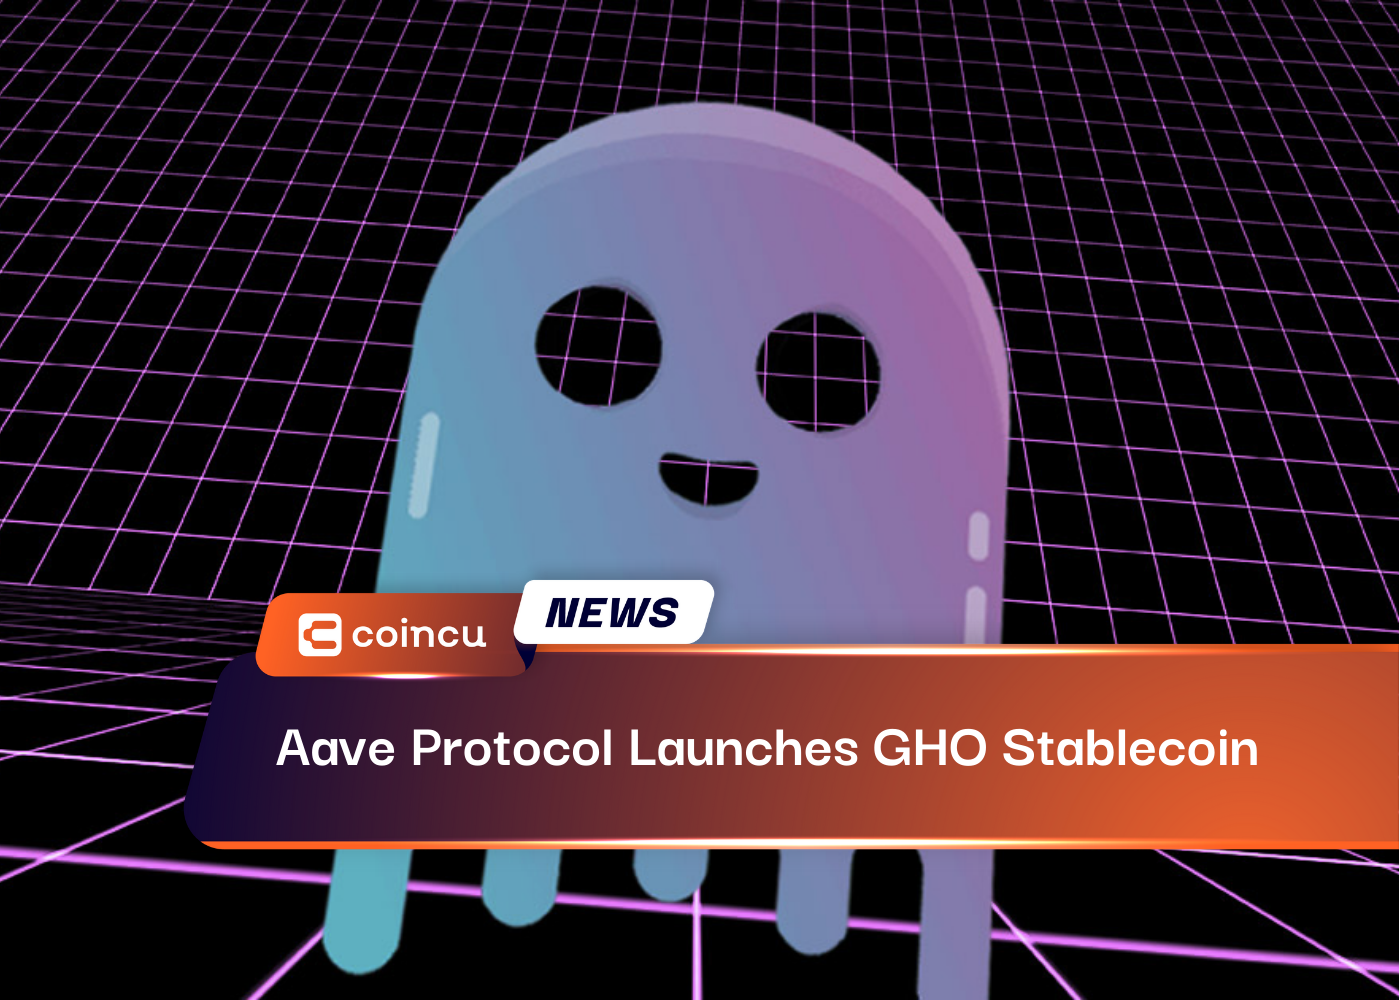 Aave Protocol Launches GHO Stablecoin